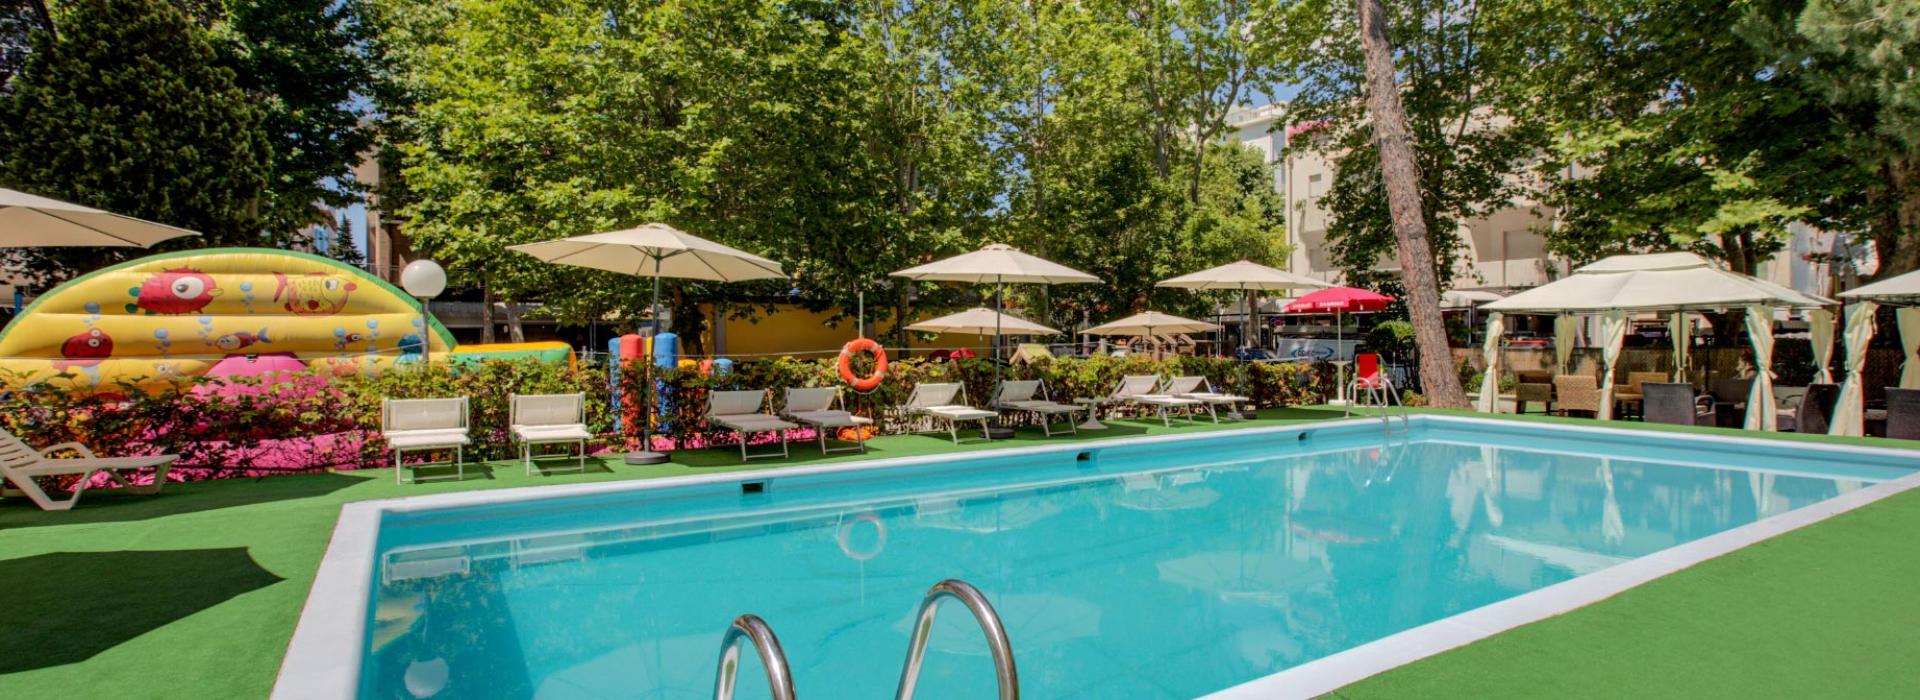 hotelaiglonrimini it 1-en-56761-late-mid-august-offer-at-family-hotel-with-swimming-pool-in-rimini 012